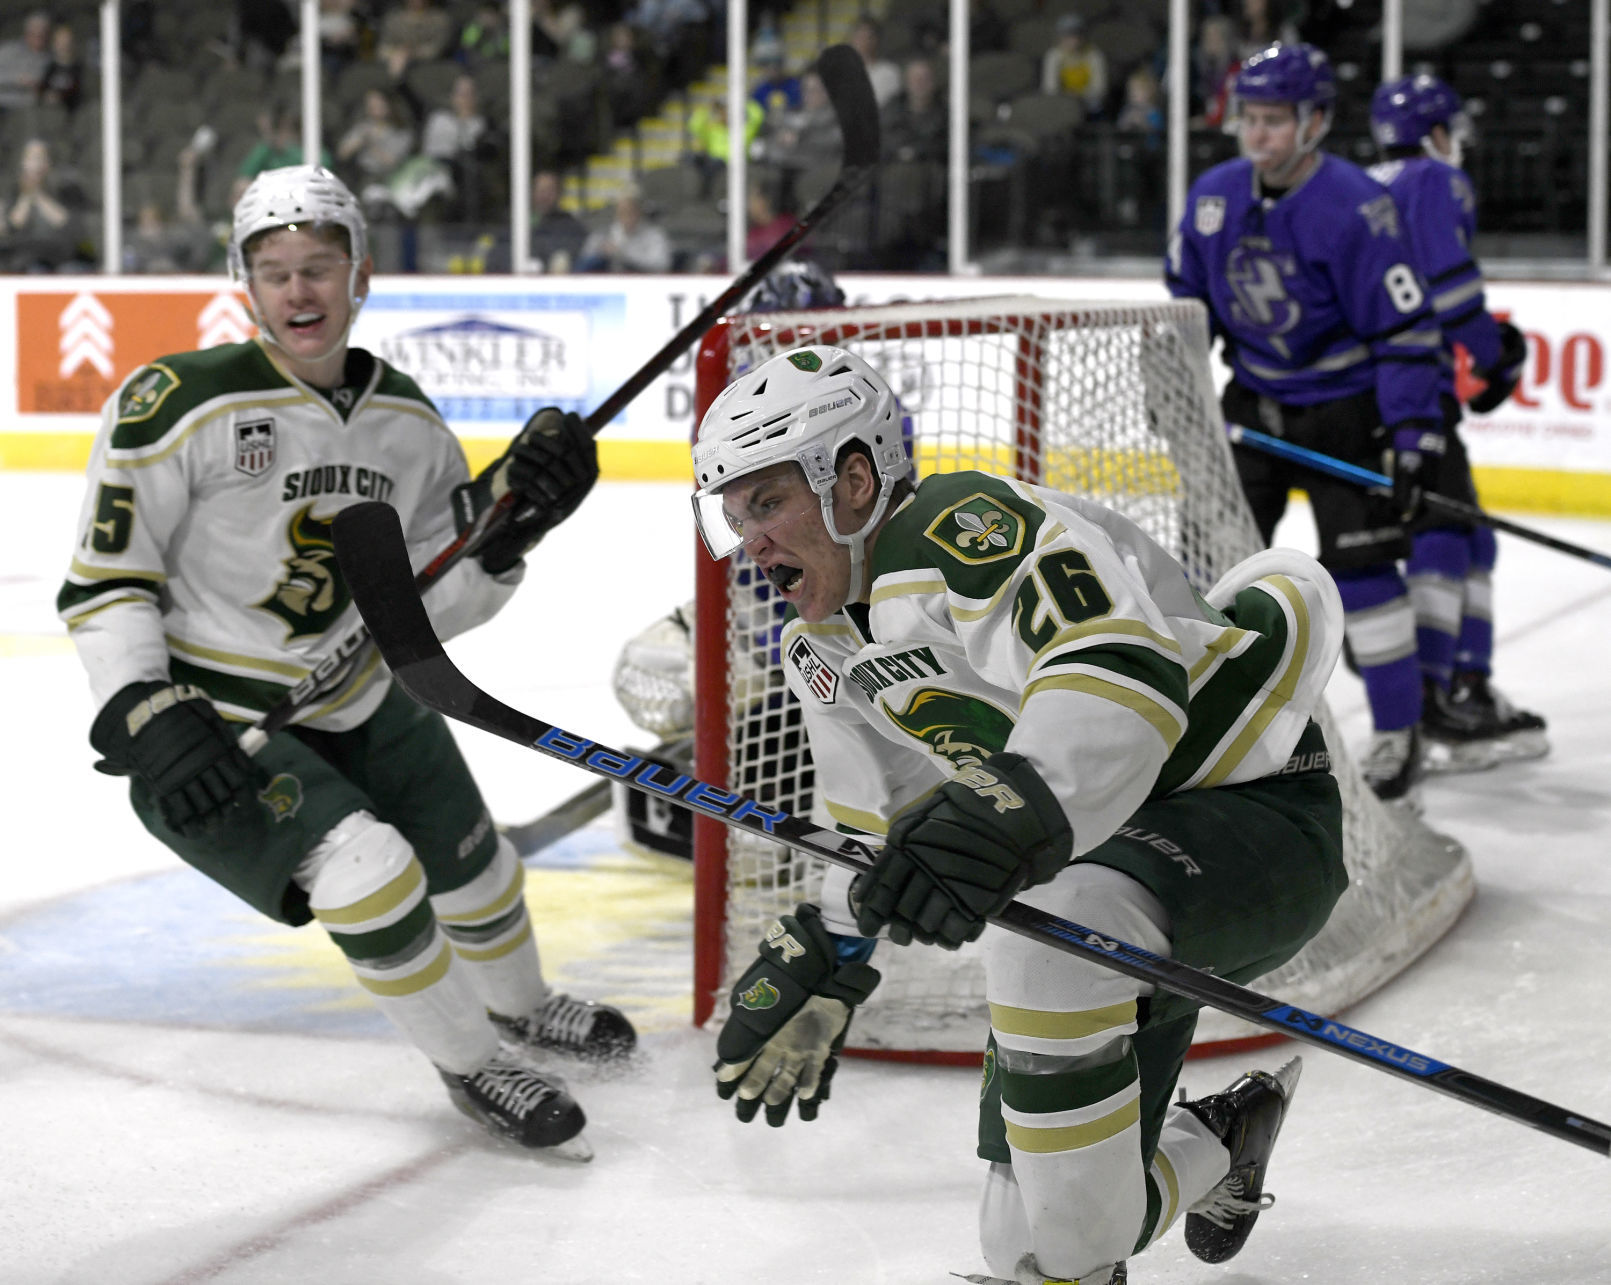 Sioux City Musketeers seek win over Omaha on New Years Eve